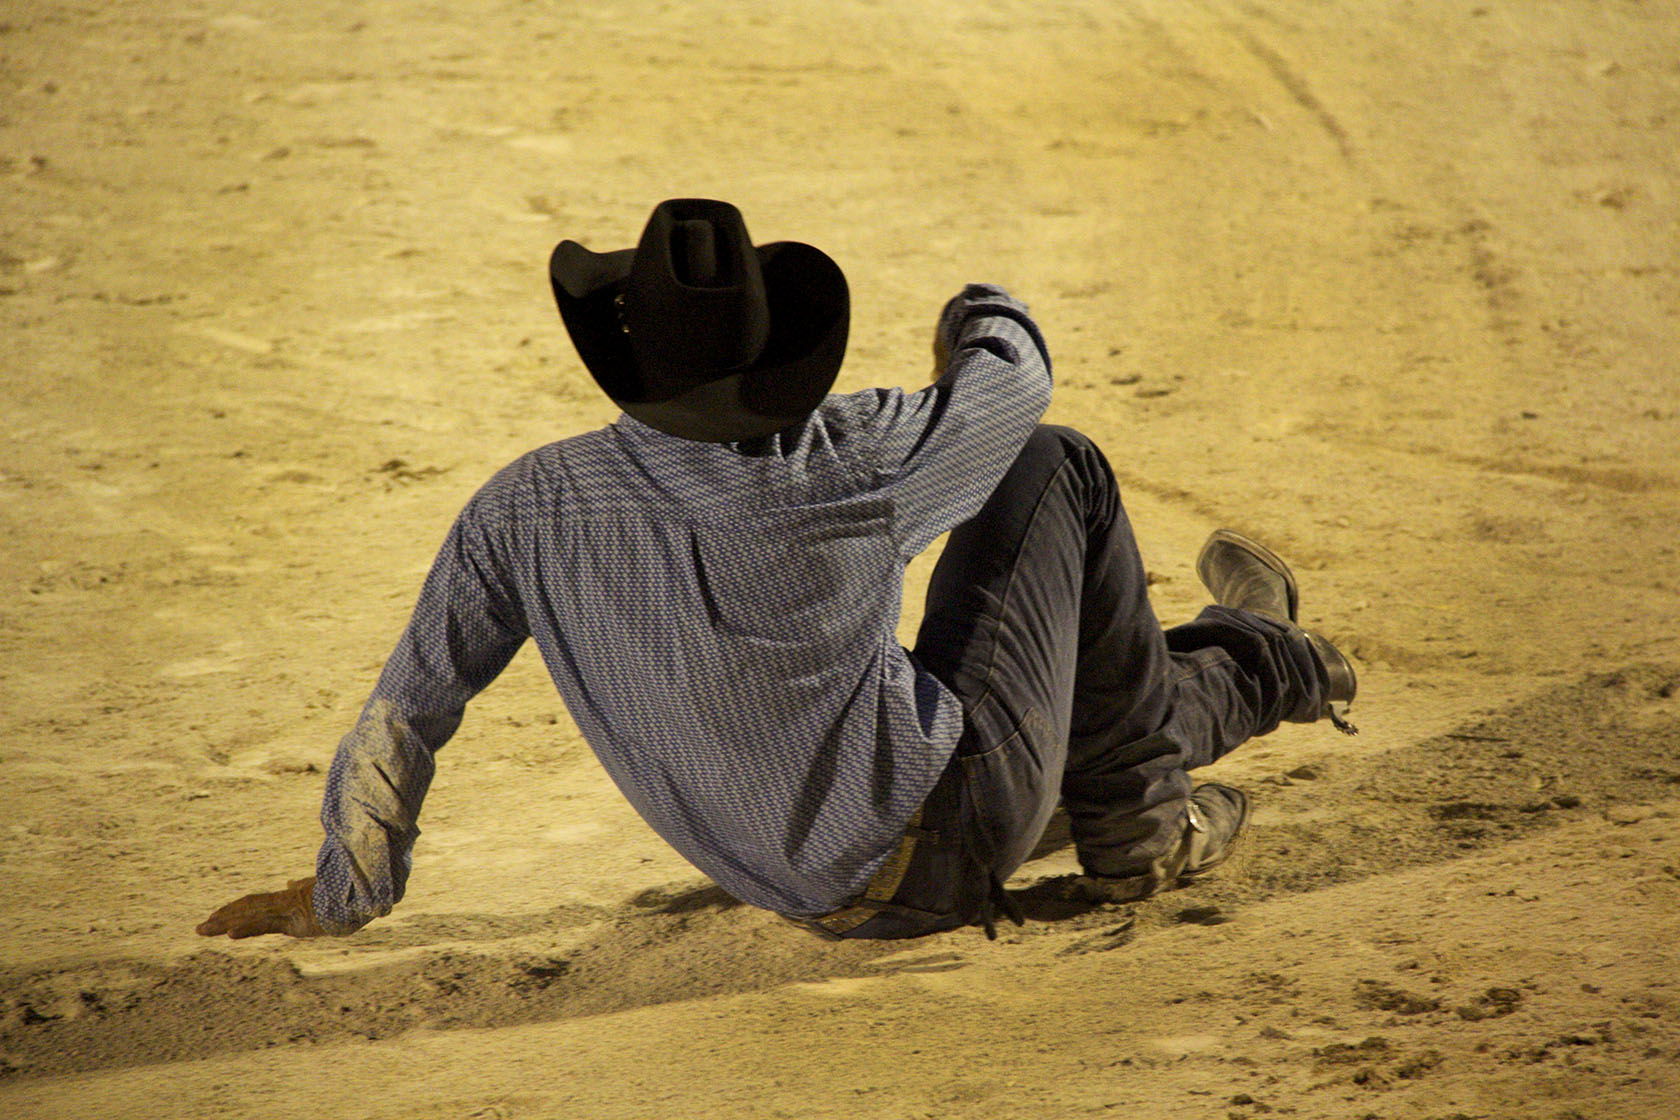 Cowboys in Provence #AmericanRodeo #Provence